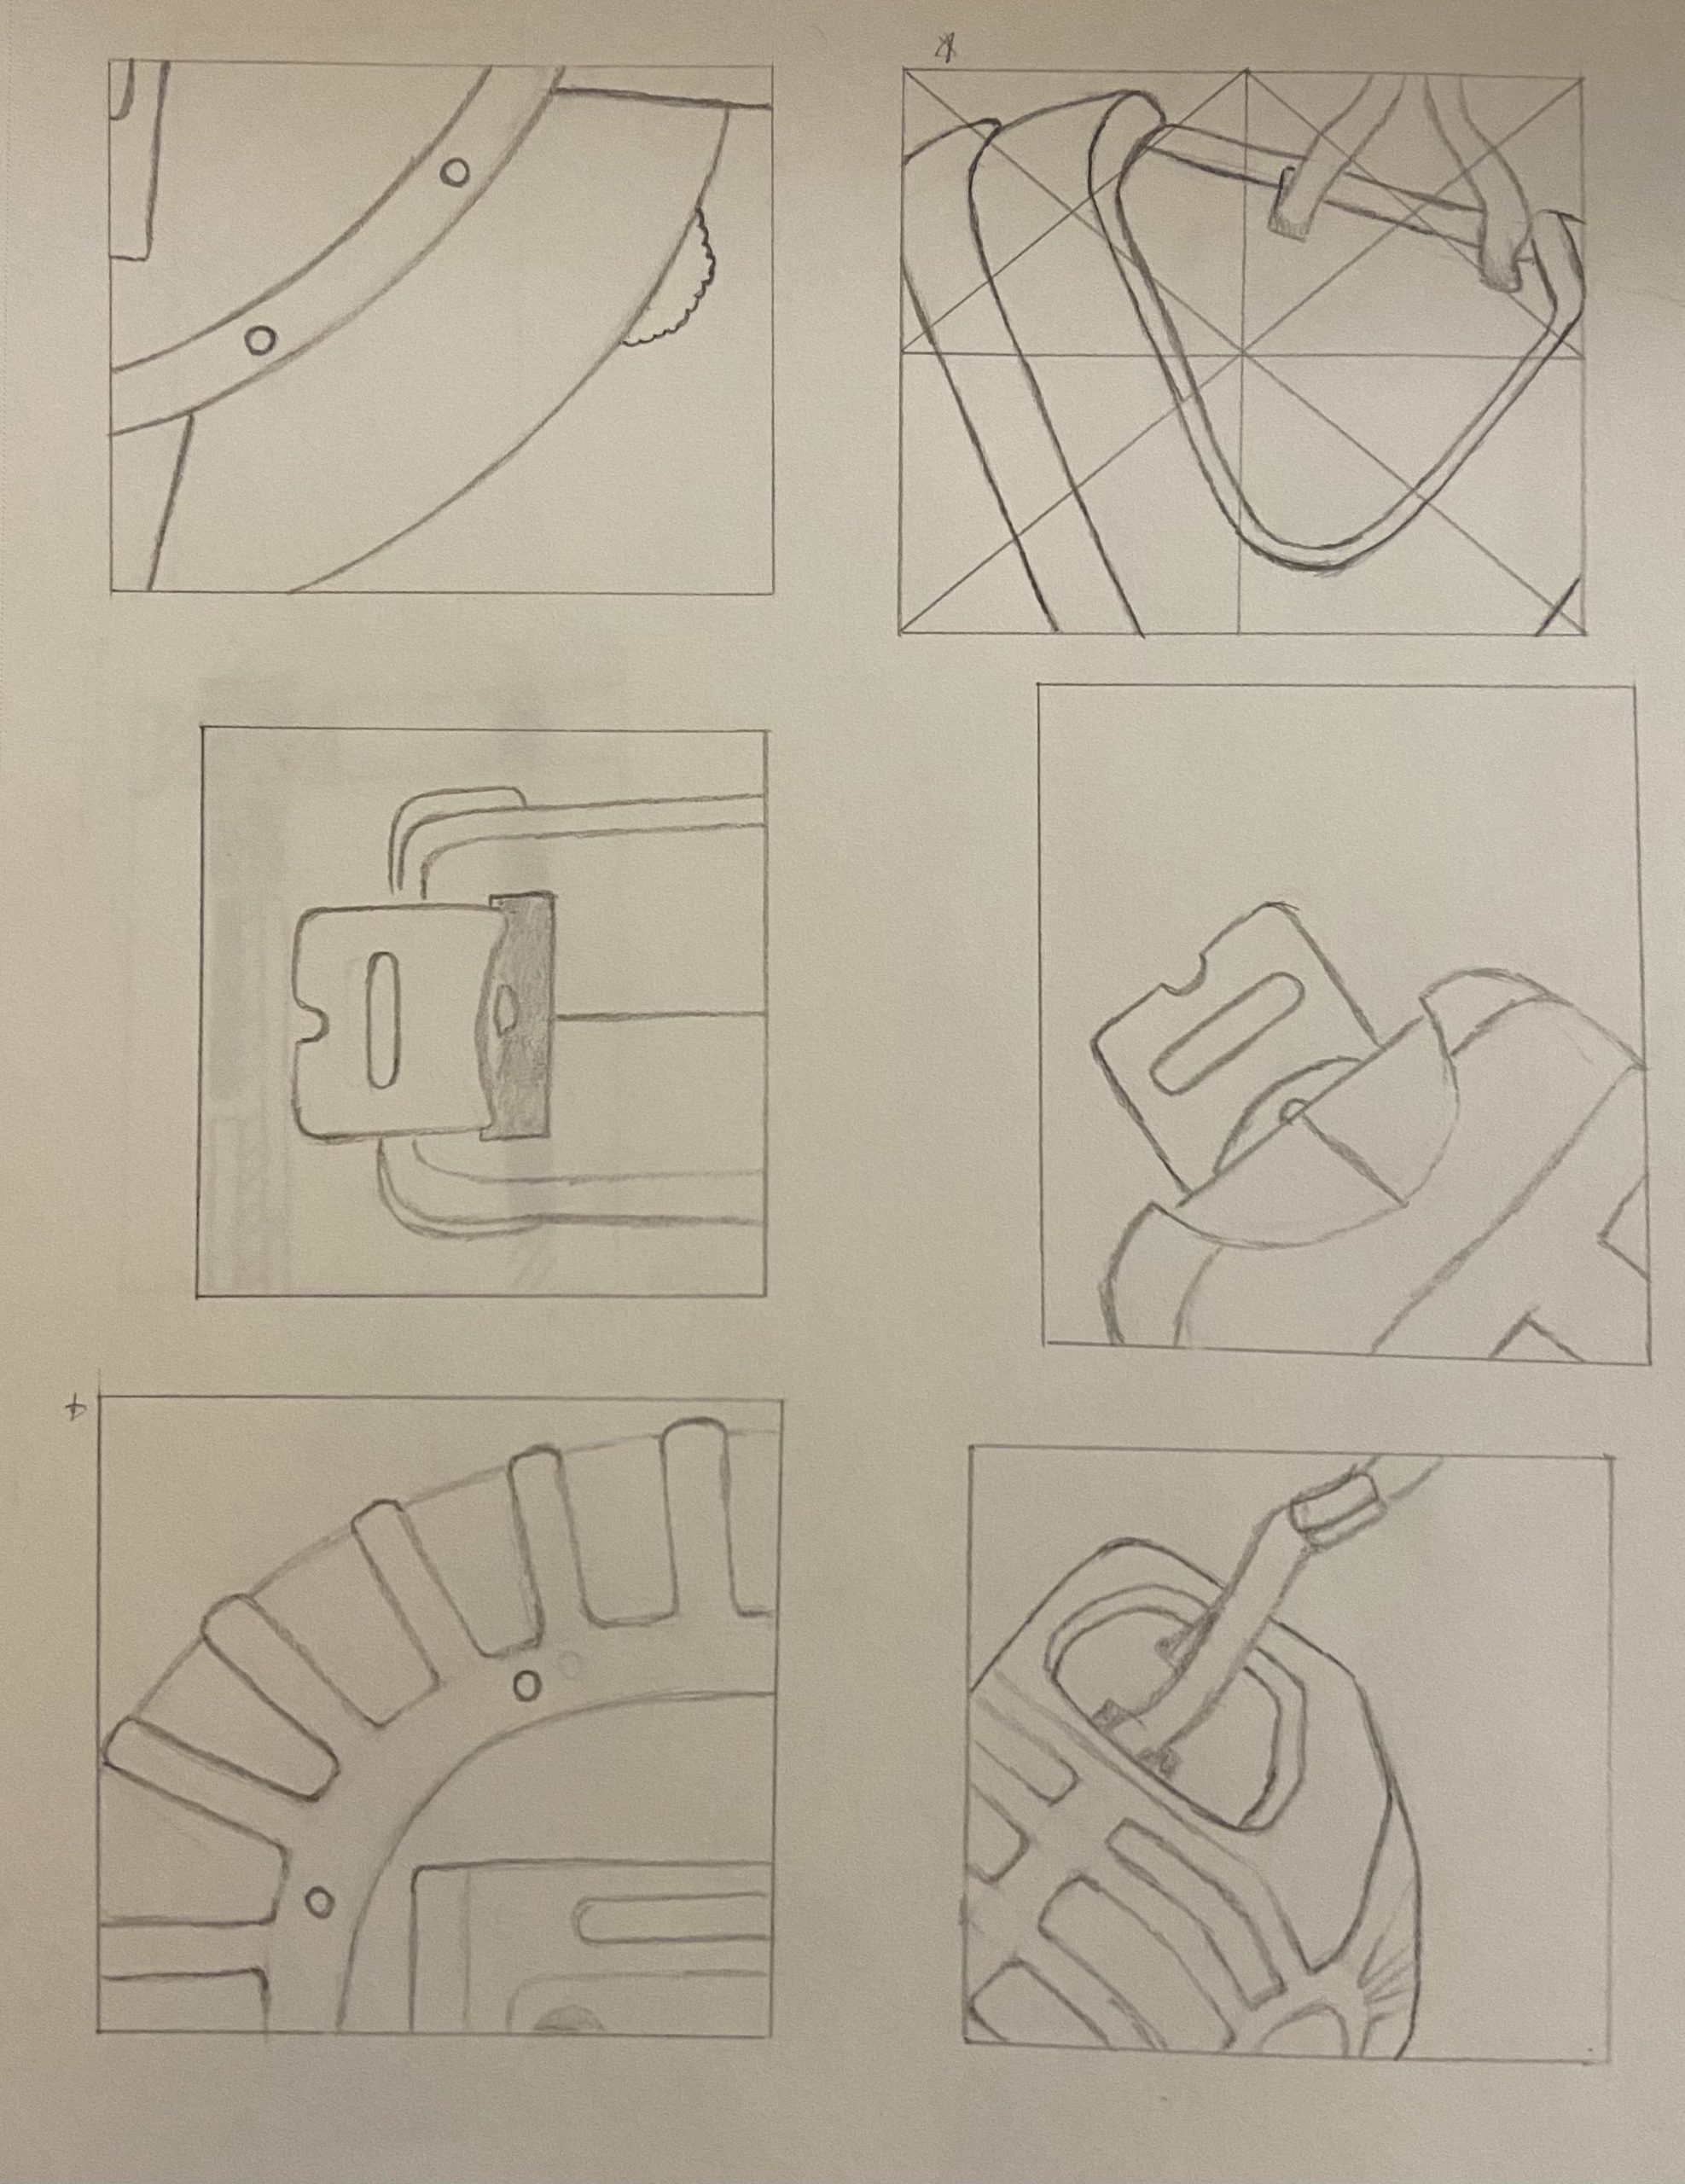 Thumbnail Sketches and Grid Transposition Exercise